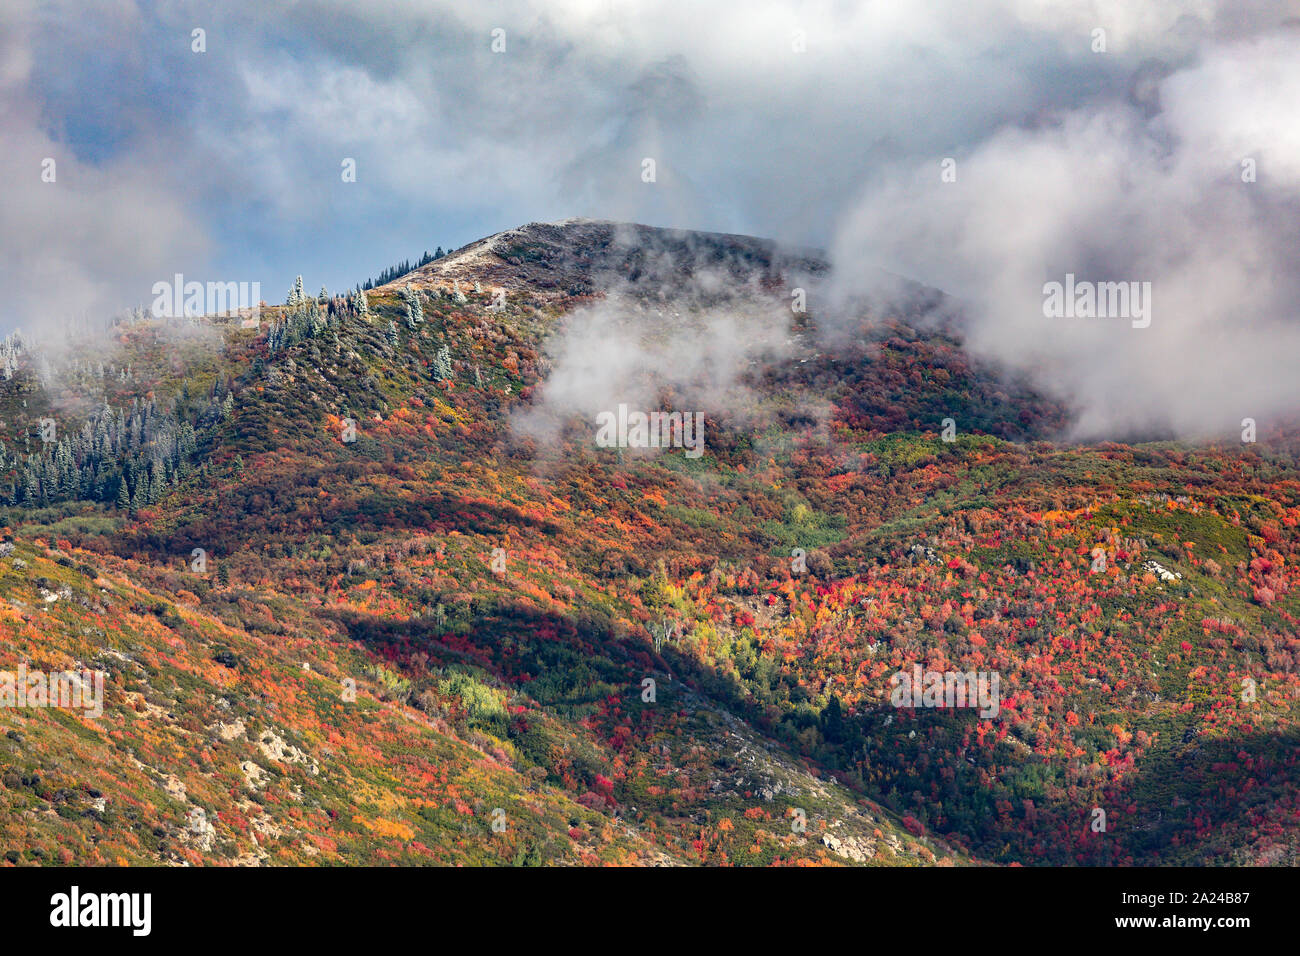 This is a view of the fall colors on the Wasatch Mountains east of Farmington, Utah, USA as the clouds start to break up after a storm.  This area is Stock Photo